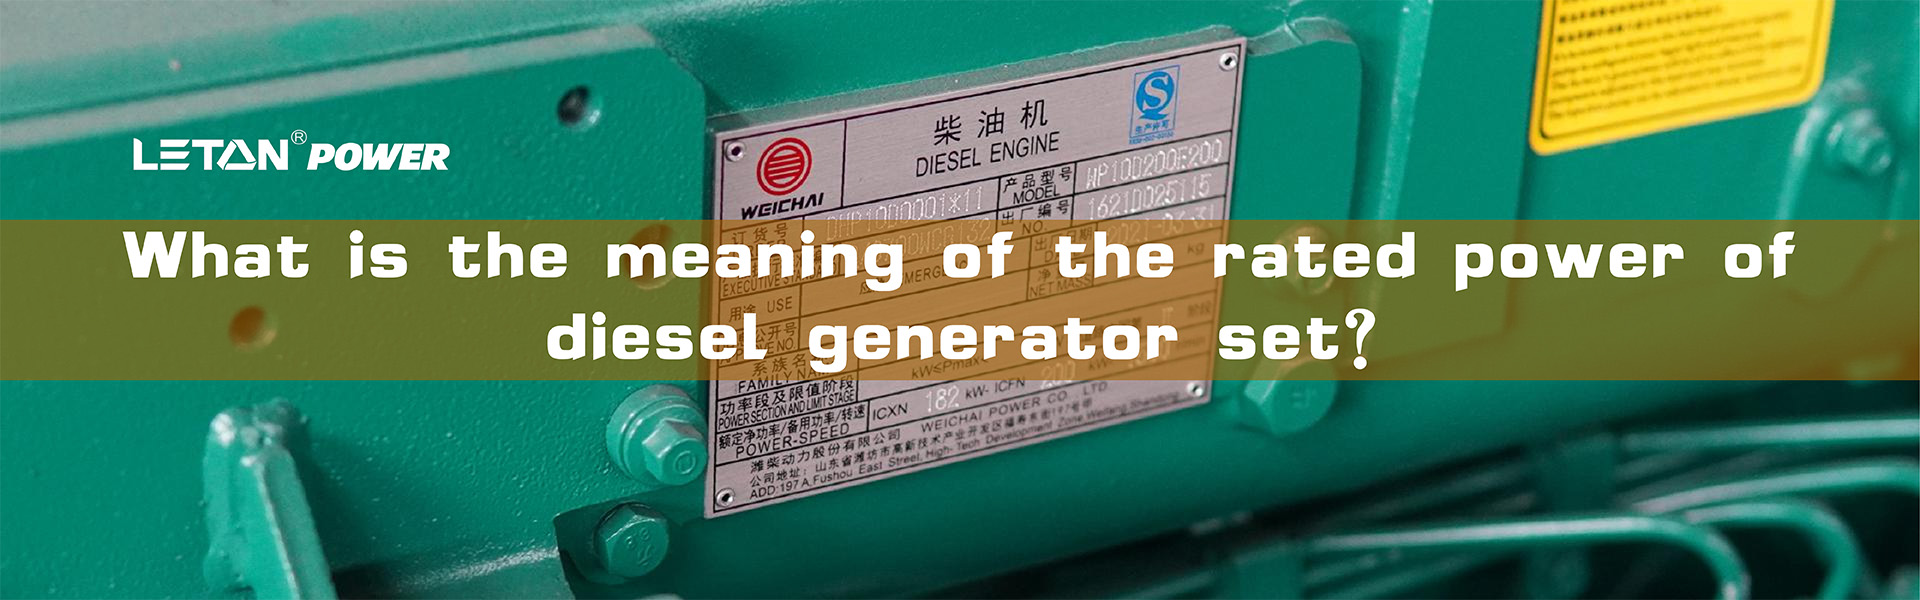 What is the meaning of the rated power of diesel generator set?